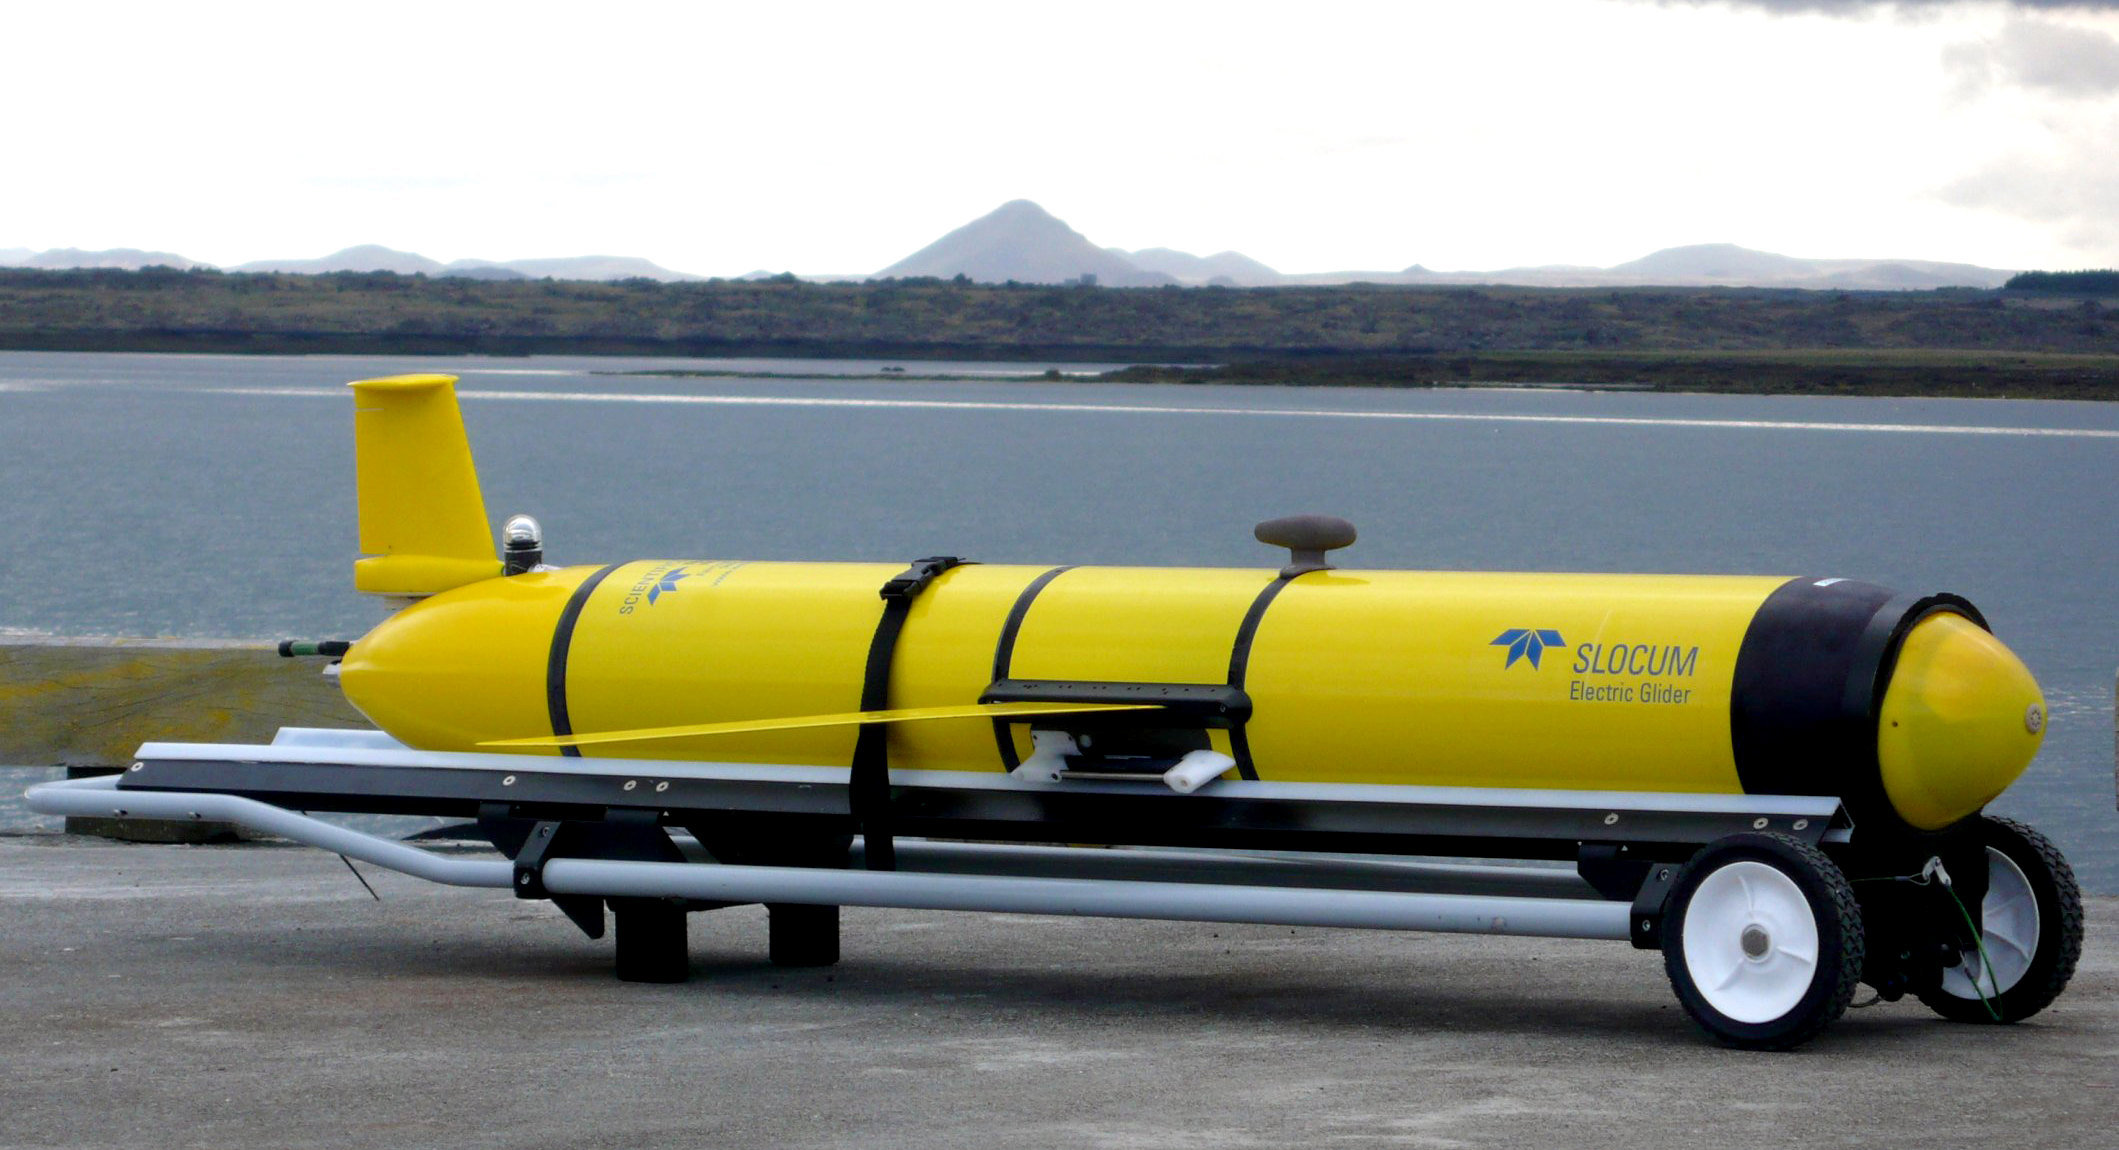 Teledyne Webb Research will modify its Slocum Glider (shown above) for the open oceans component of the Ocean Observatories Initiative. (Photo provided by Teledyne Webb Research)